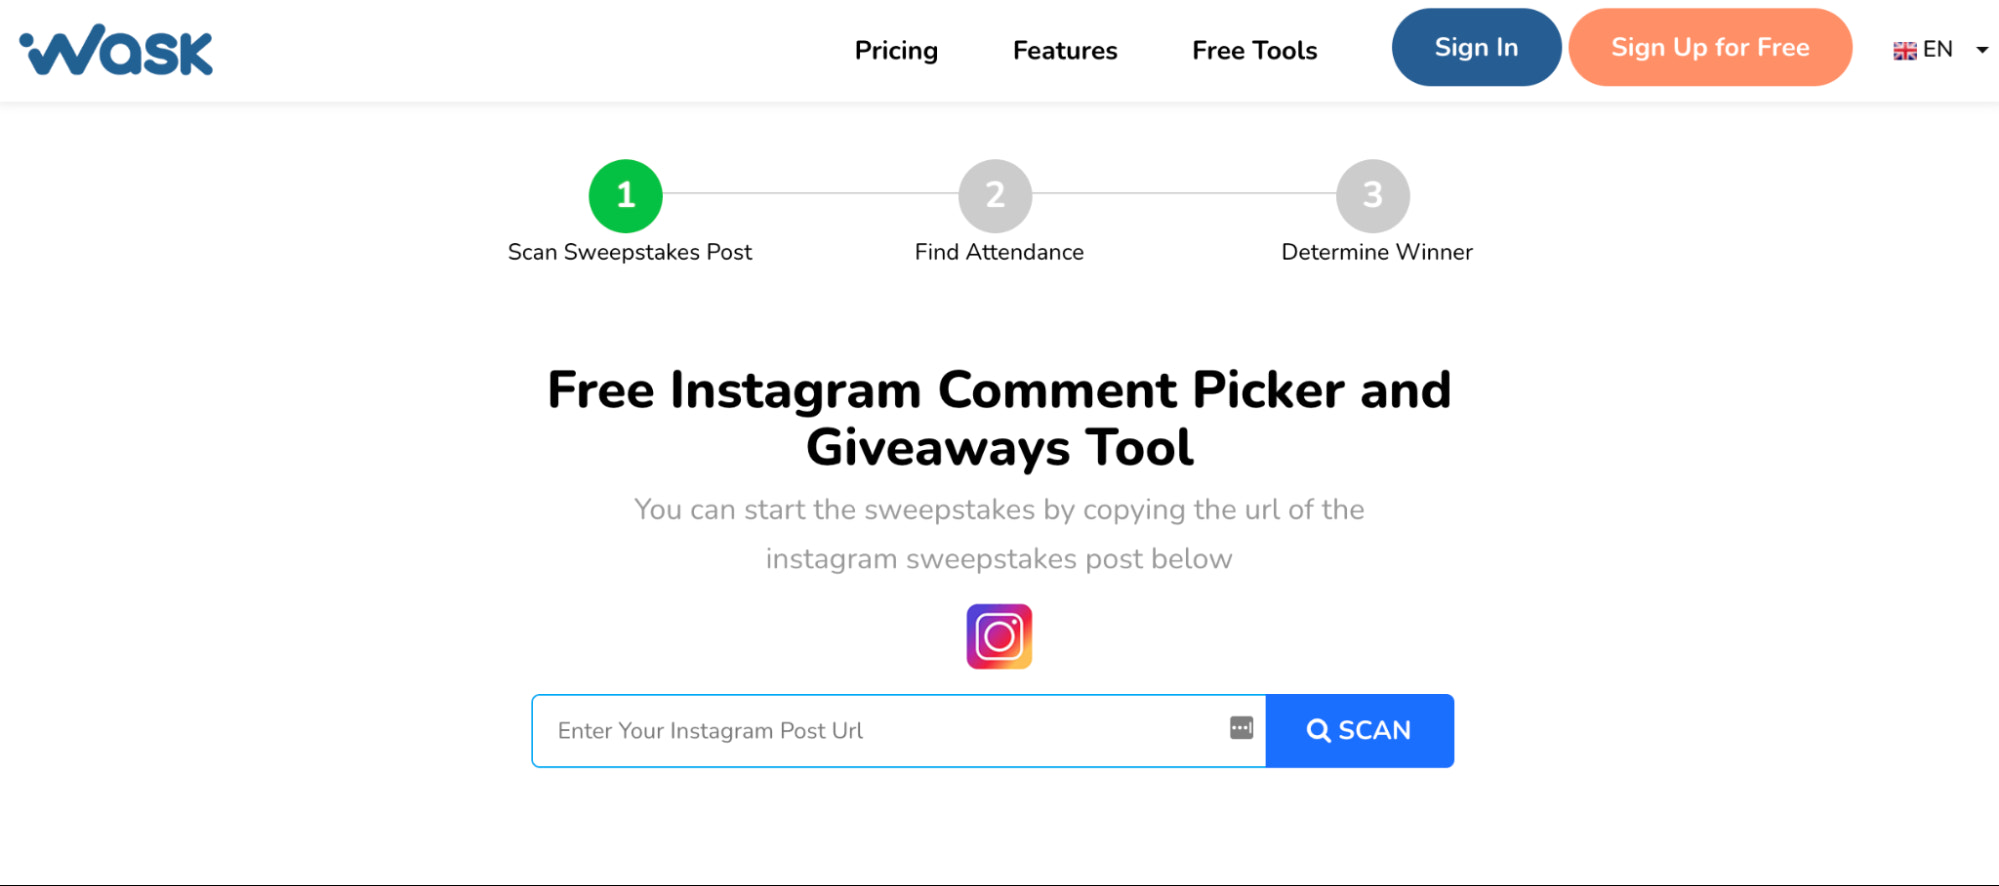 How to Do an Instagram Giveaway [+4 Tools You'll Need]